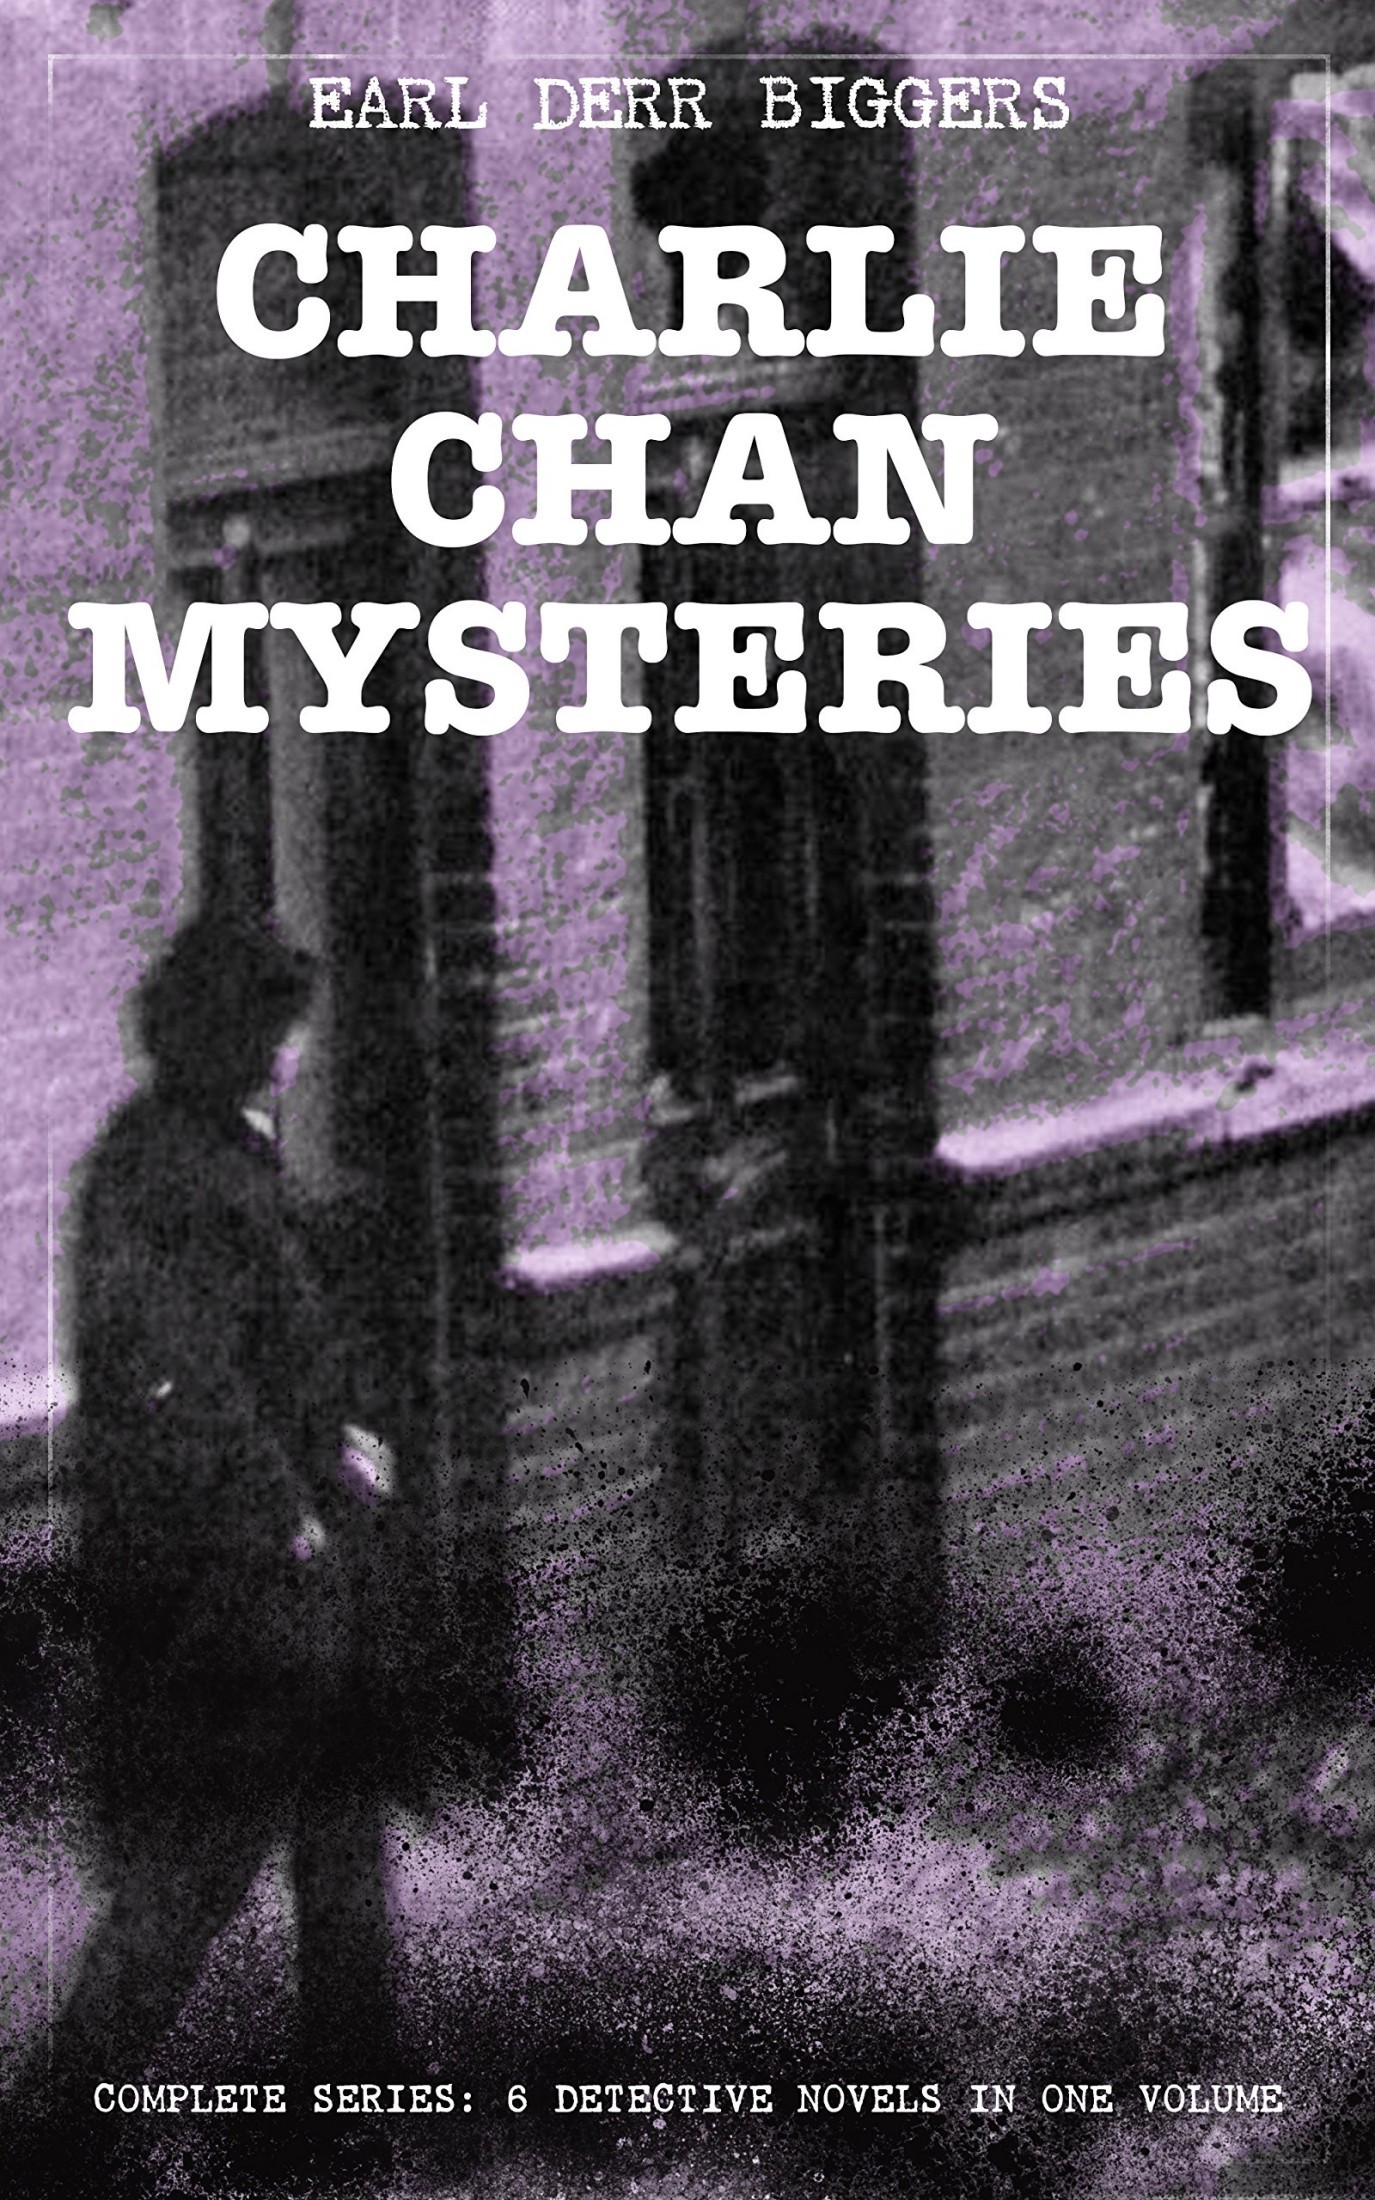 CHARLIE CHAN MYSTERIES – Complete Series